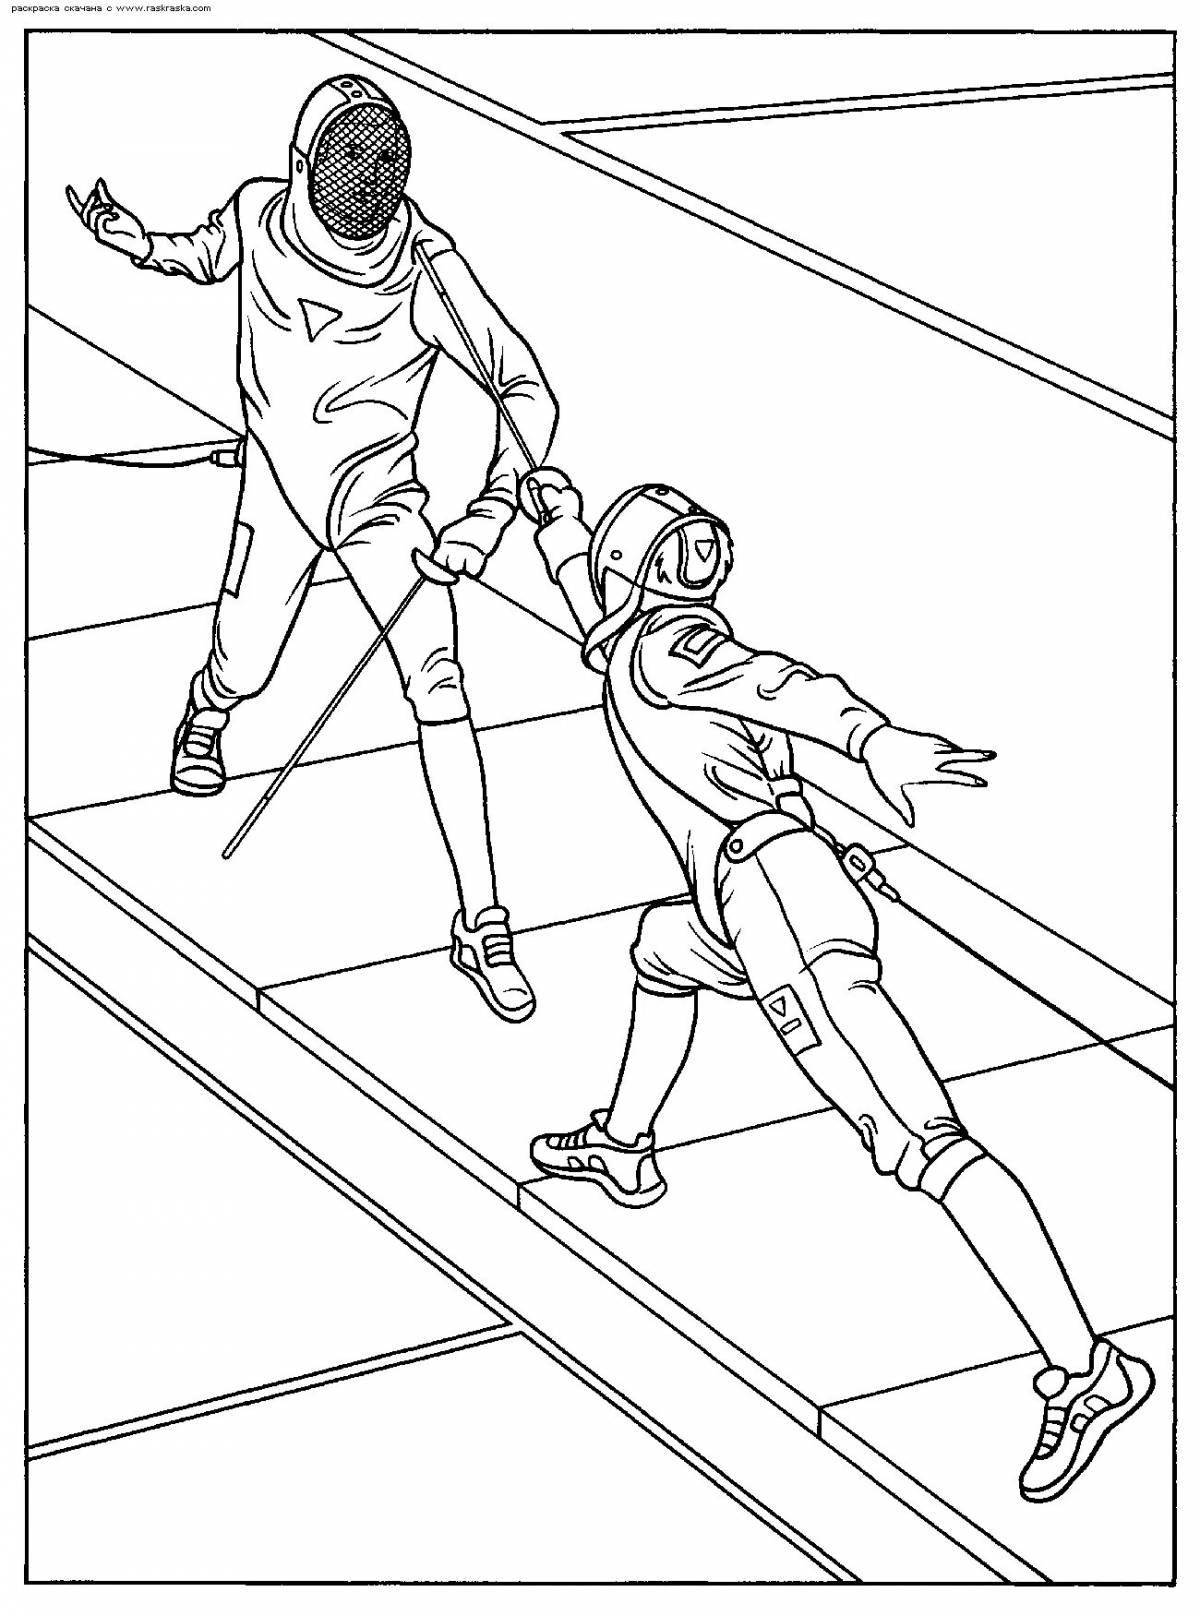 Animated sports coloring page